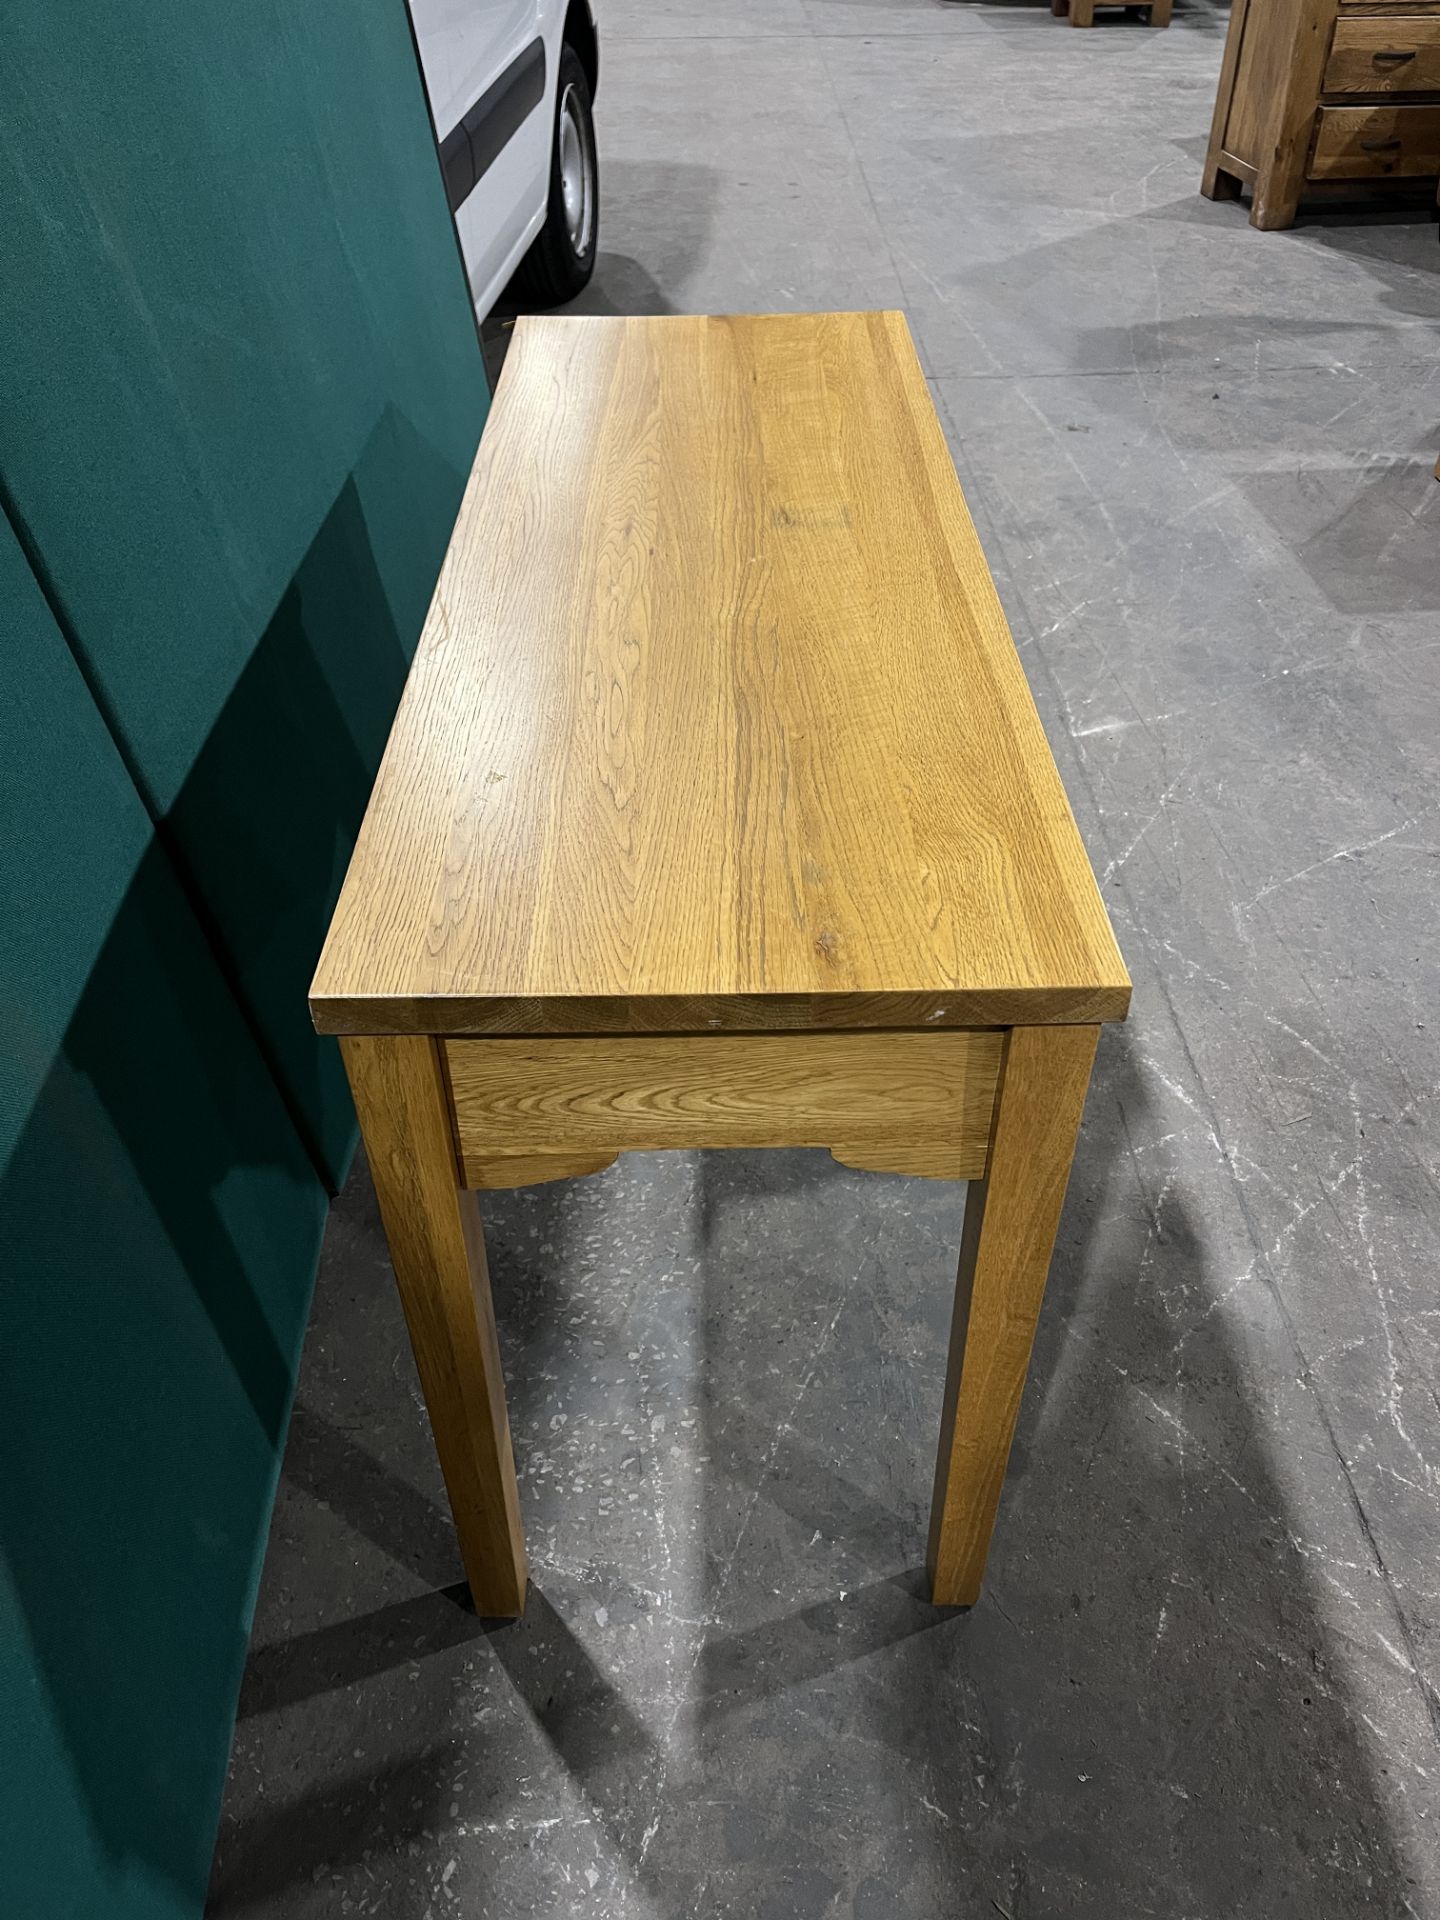 Oak Console Table w 2 Drawers - Image 5 of 5